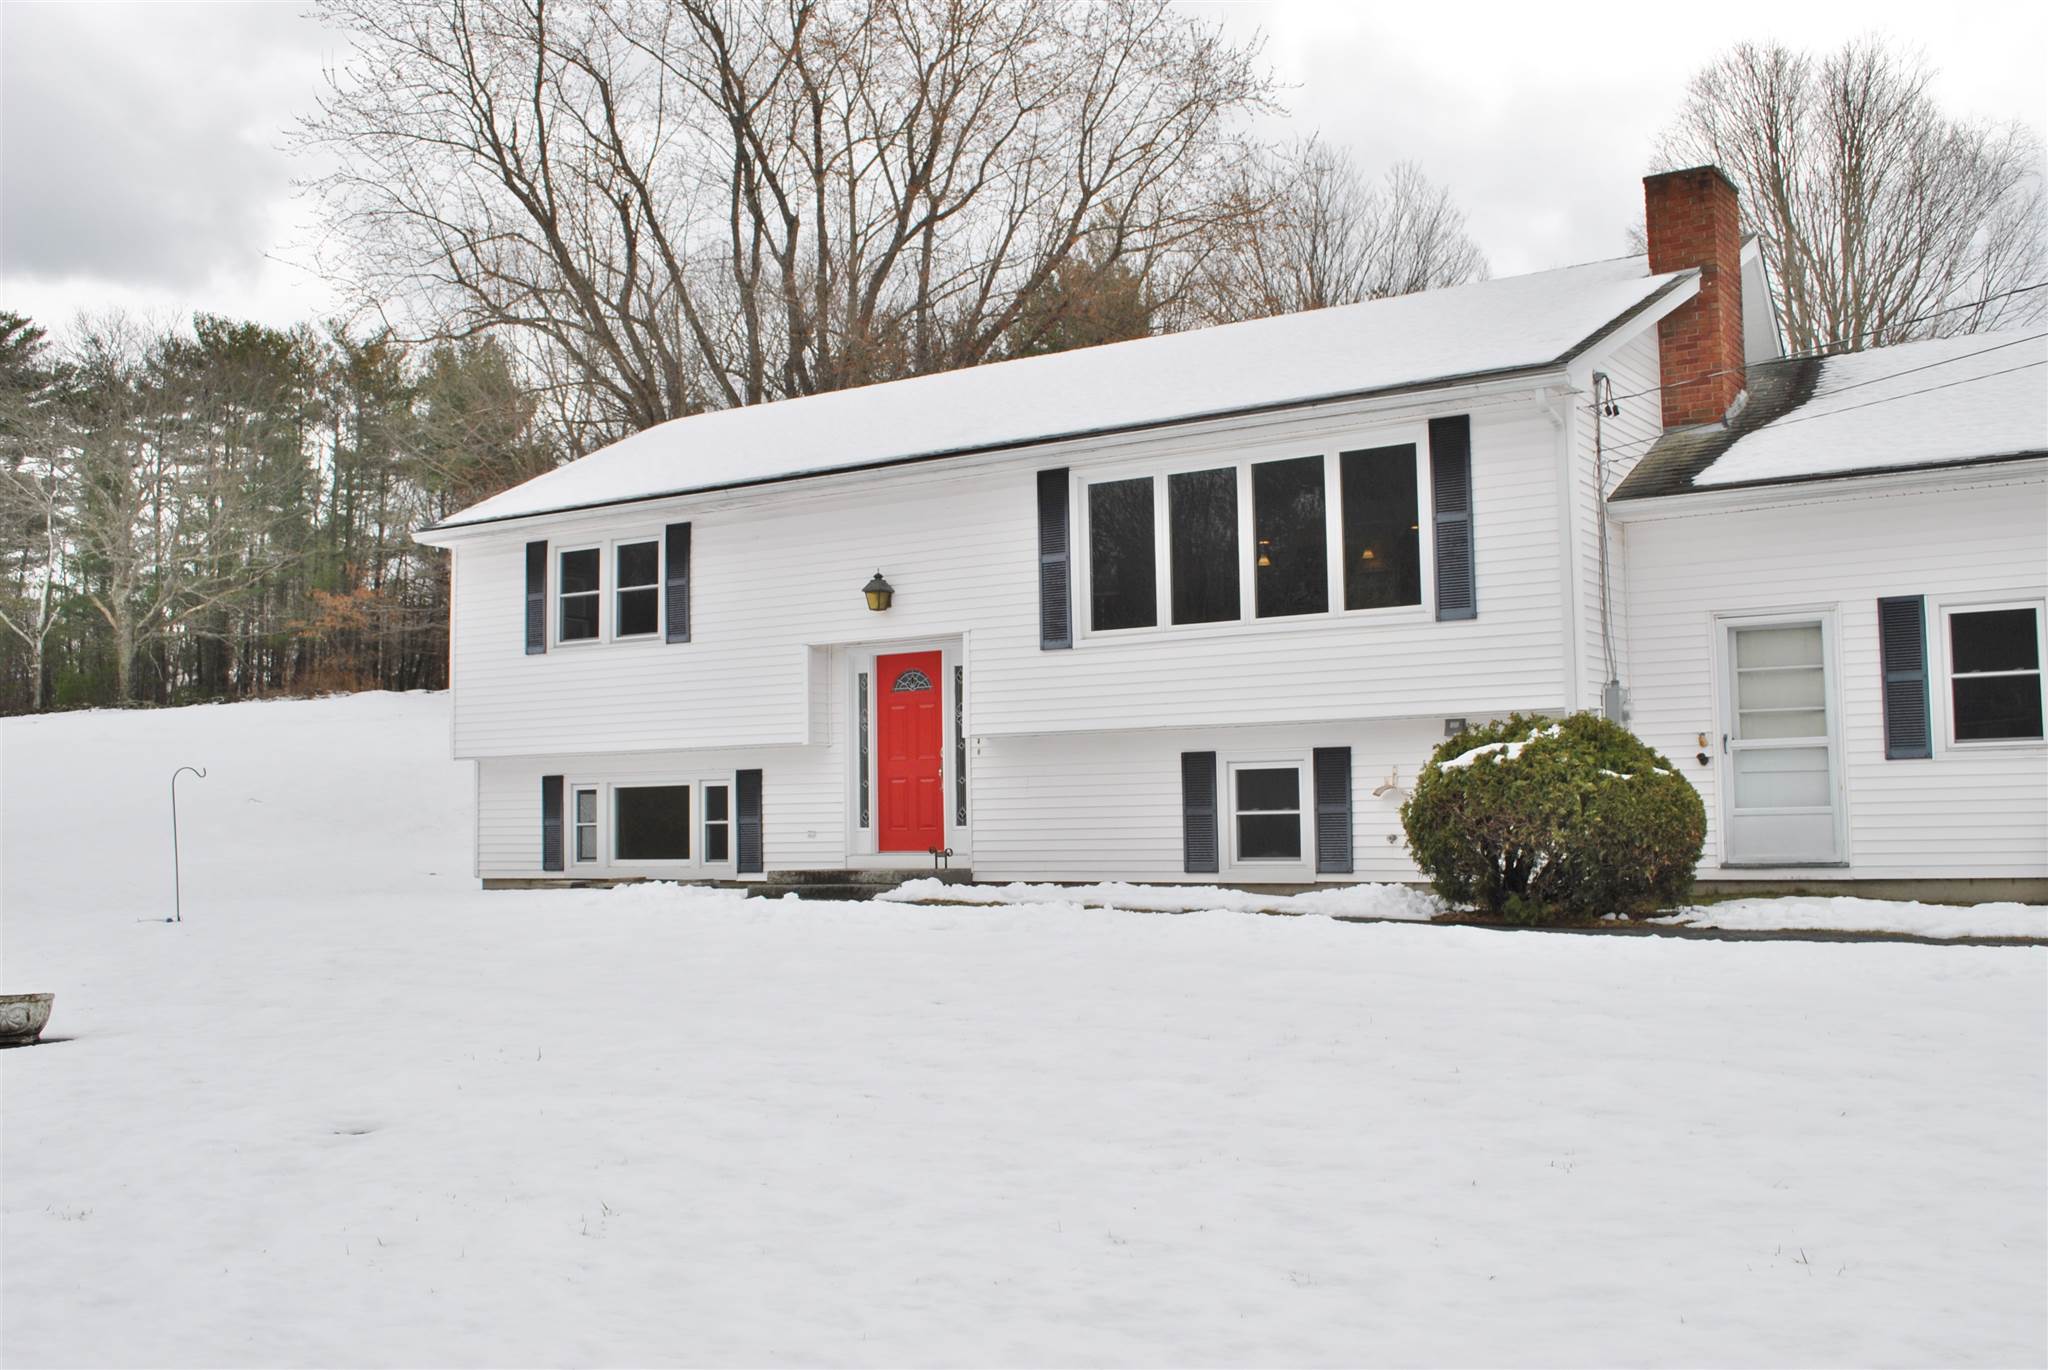 89 Speare Road, Hudson, NH 03051